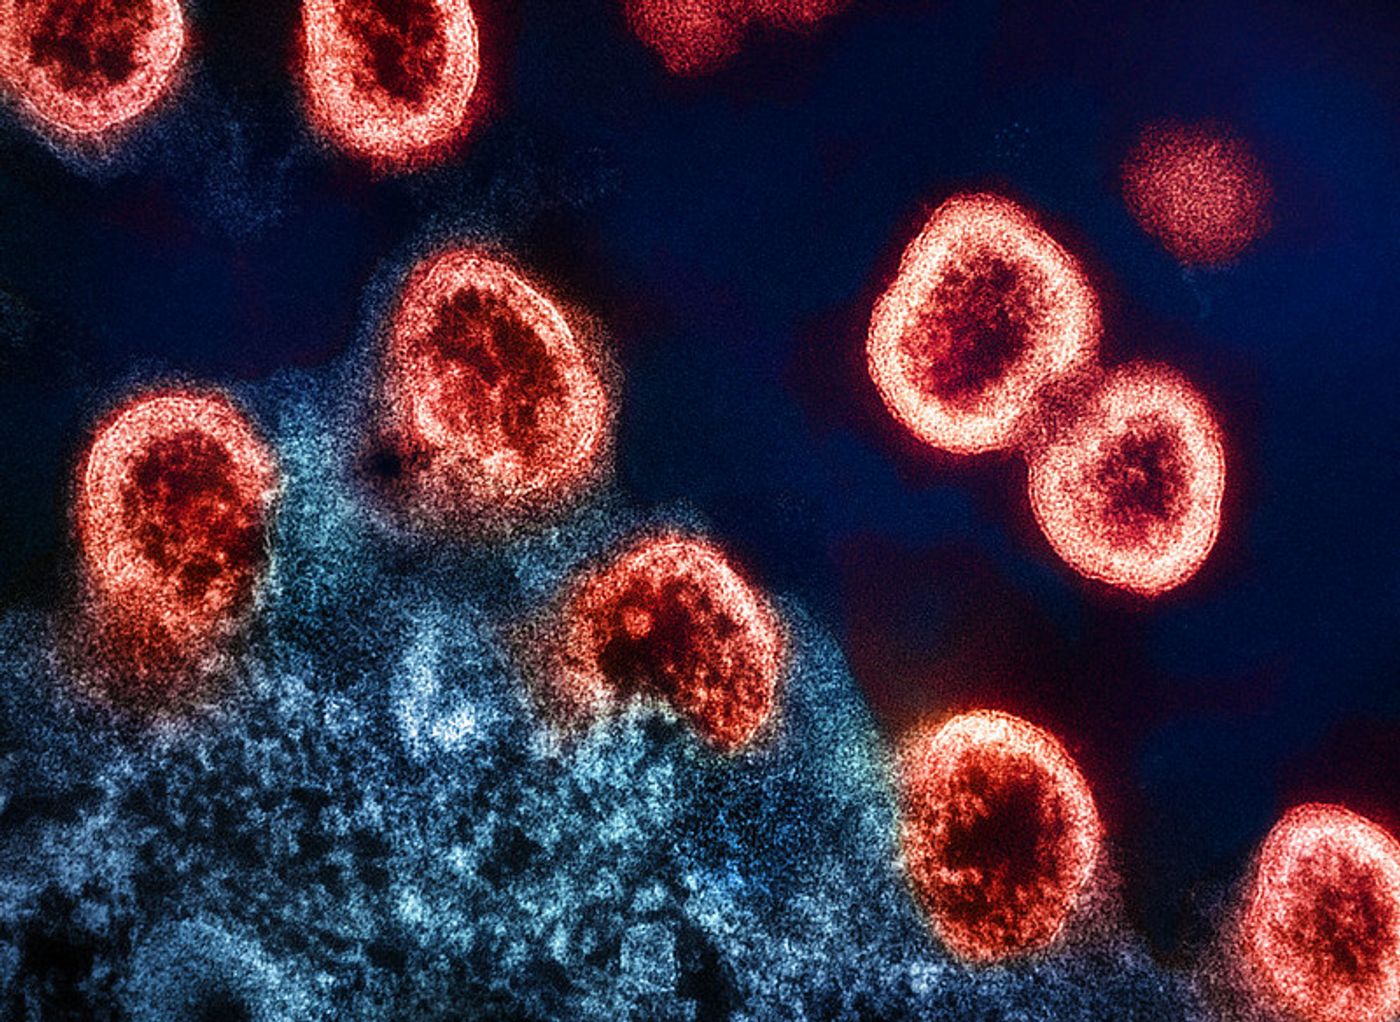   Transmission electron micrograph of HIV-1 virus particles (colorized red) replicating from an HIV-infected H9 T-cell (blue). Image captured at the NIAID Integrated Research Facility (IRF) in Fort Detrick, Maryland. / Credit: NIAID